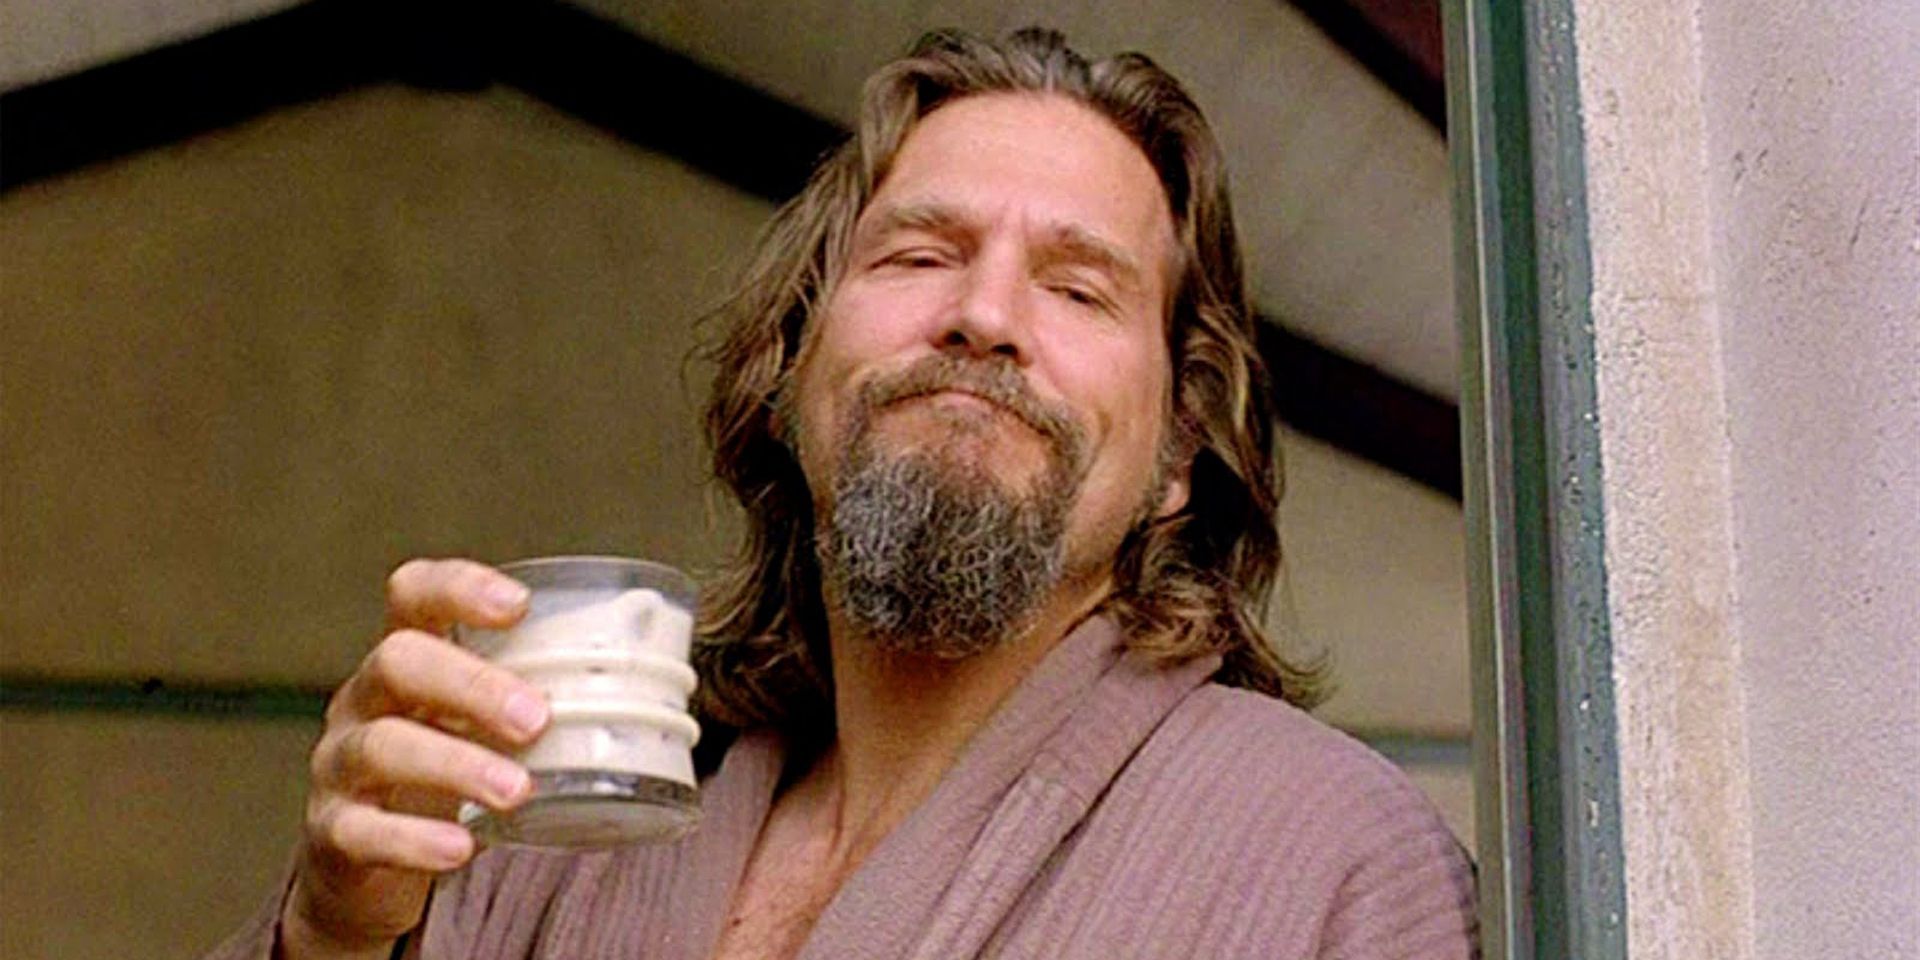 The Big Lebowski - The Dude with White Russian